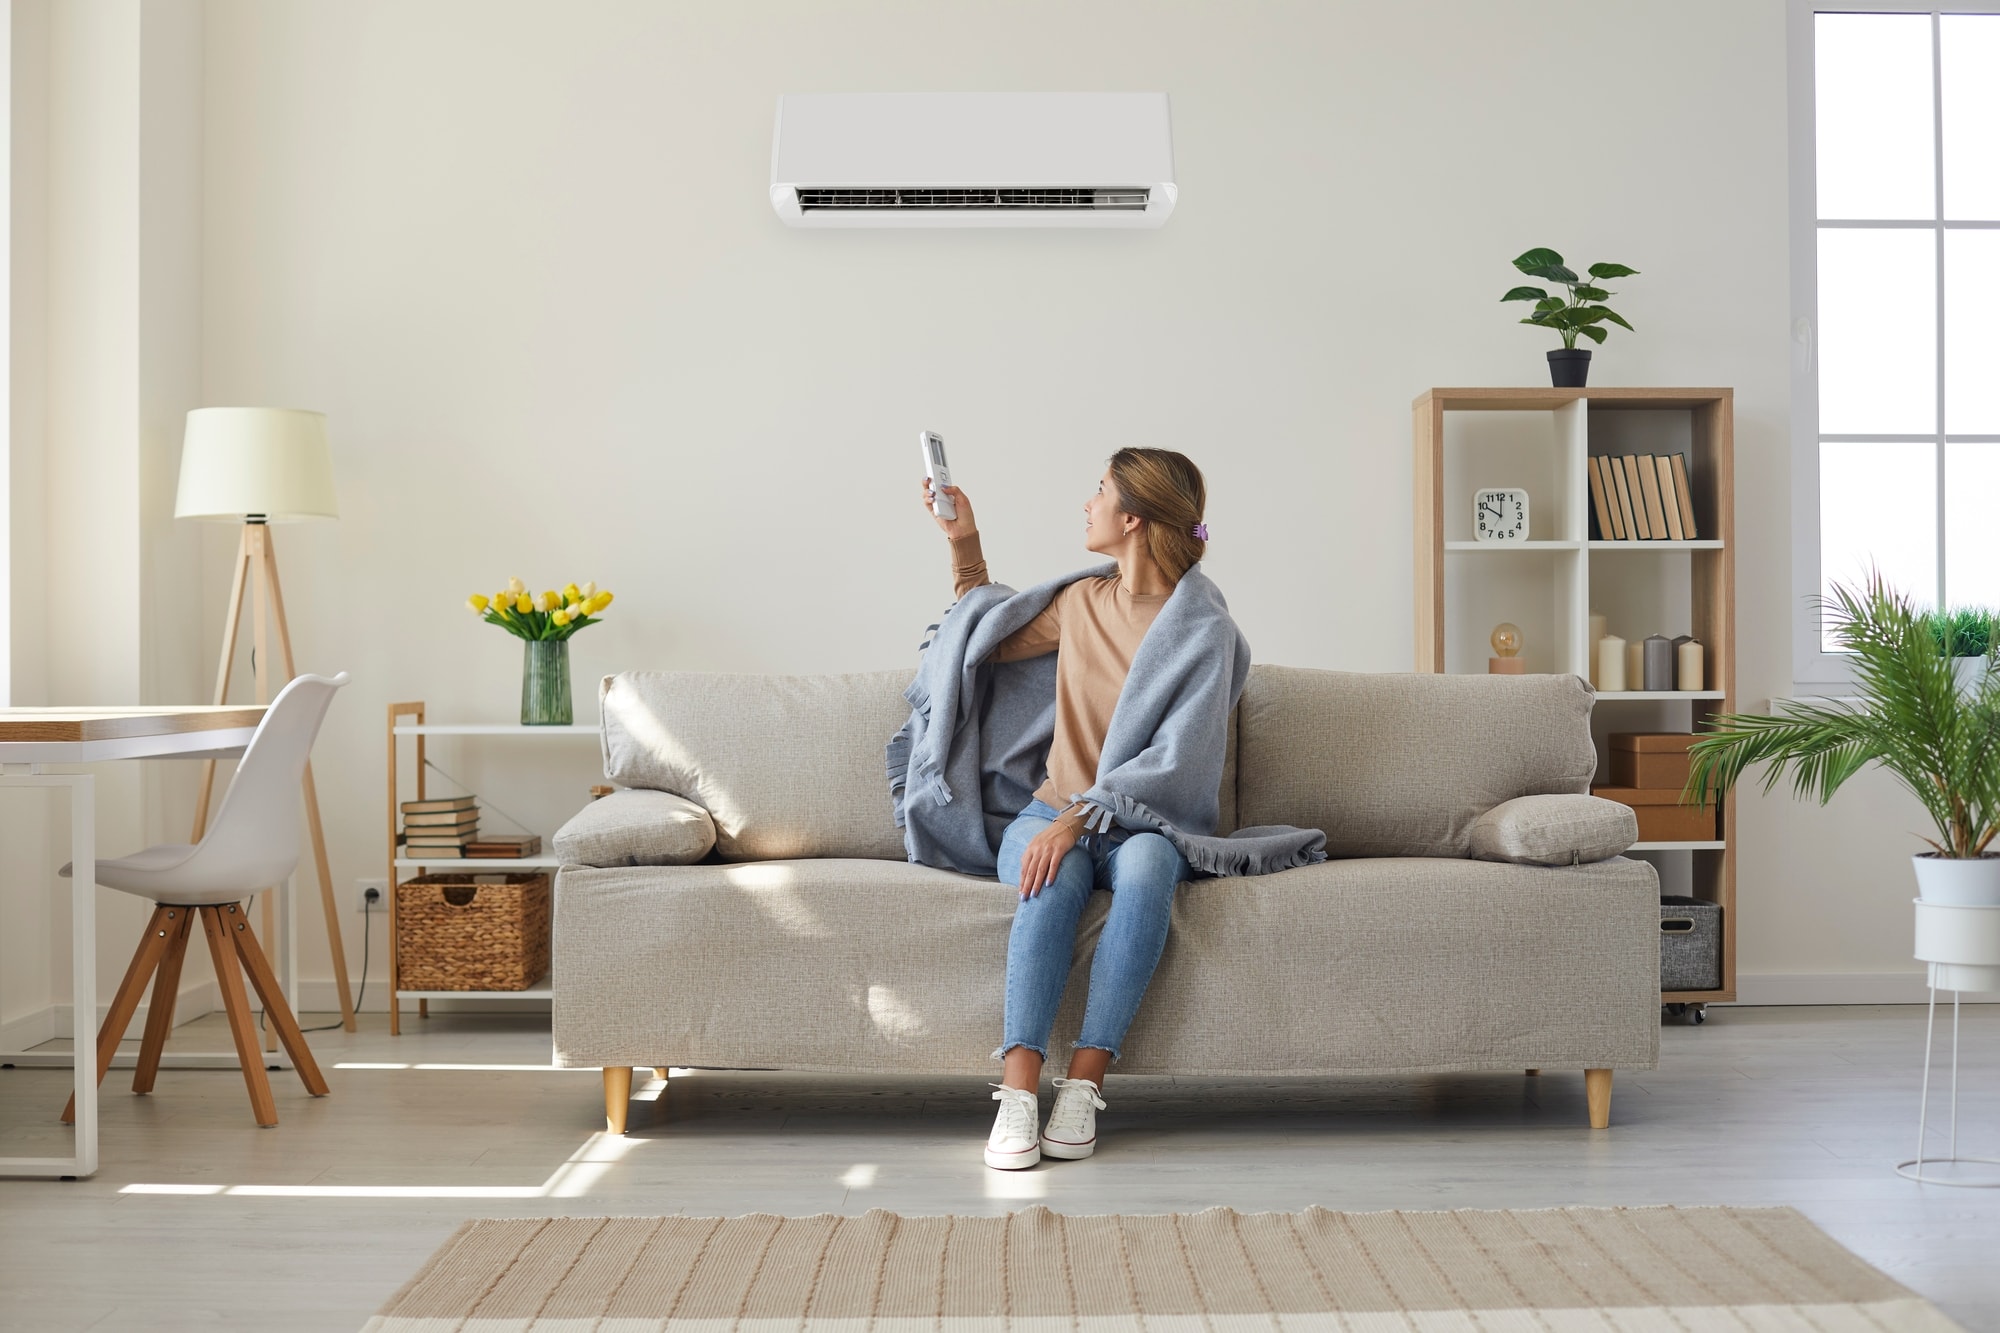 When Should I Use a Ductless AC System and What Are the Benefits?